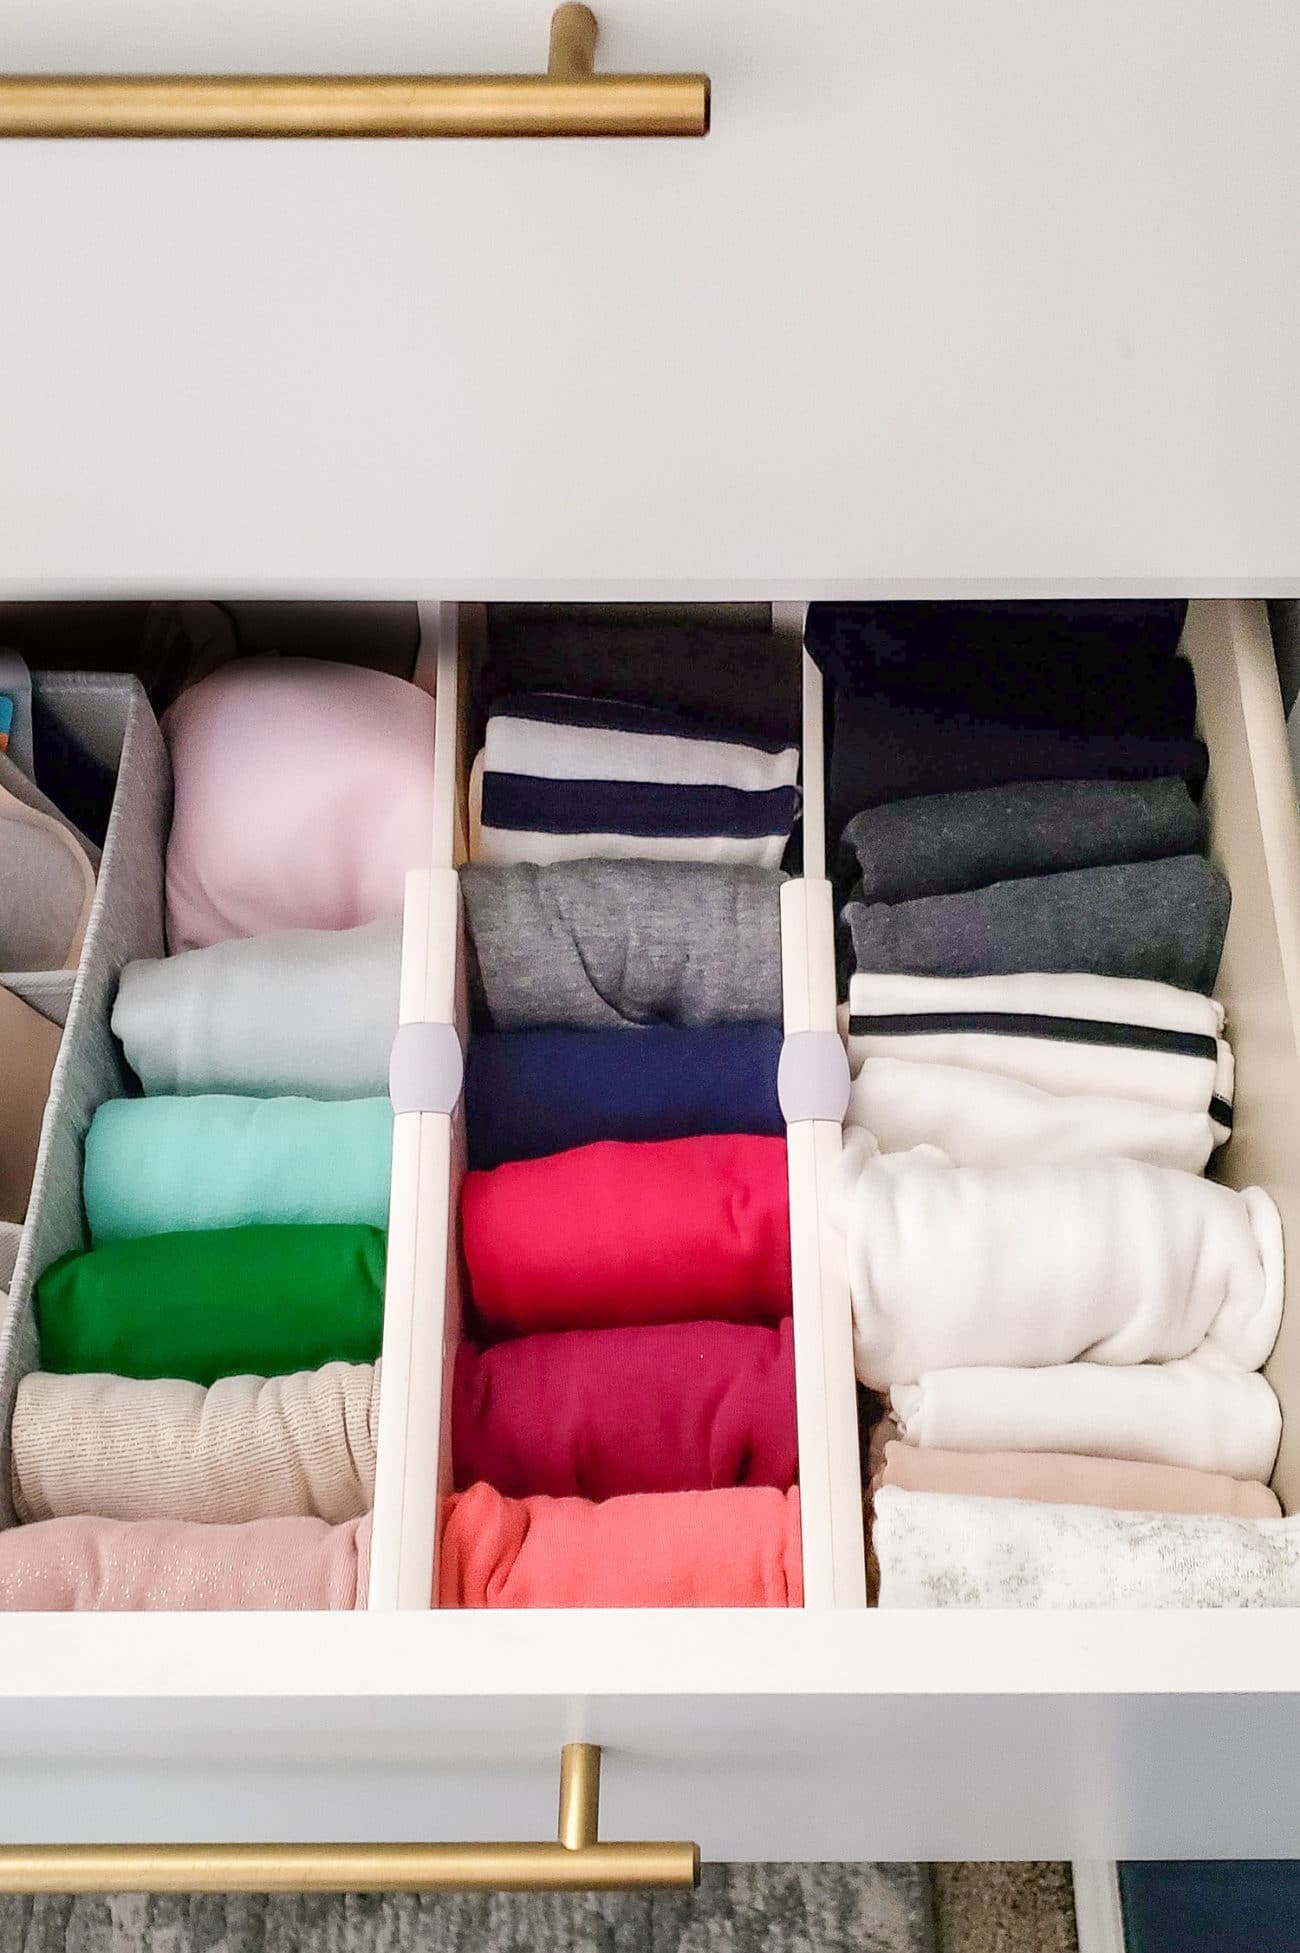 How To Store Tank Tops In A Drawer?